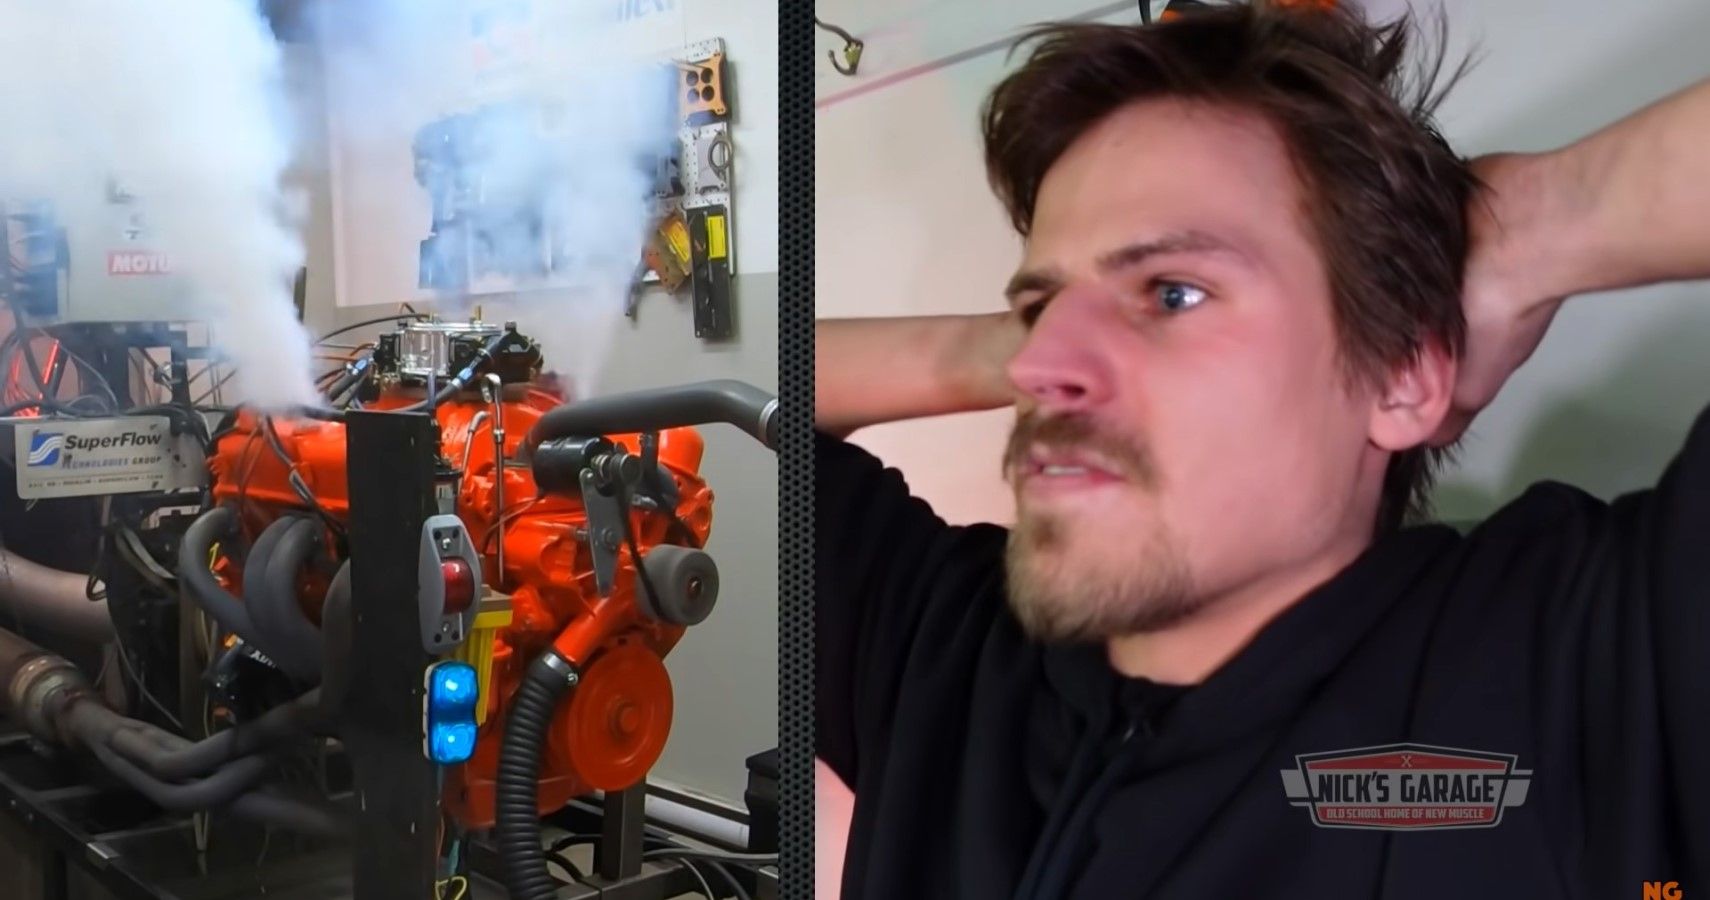 Leo shocked after seeing his engine fail